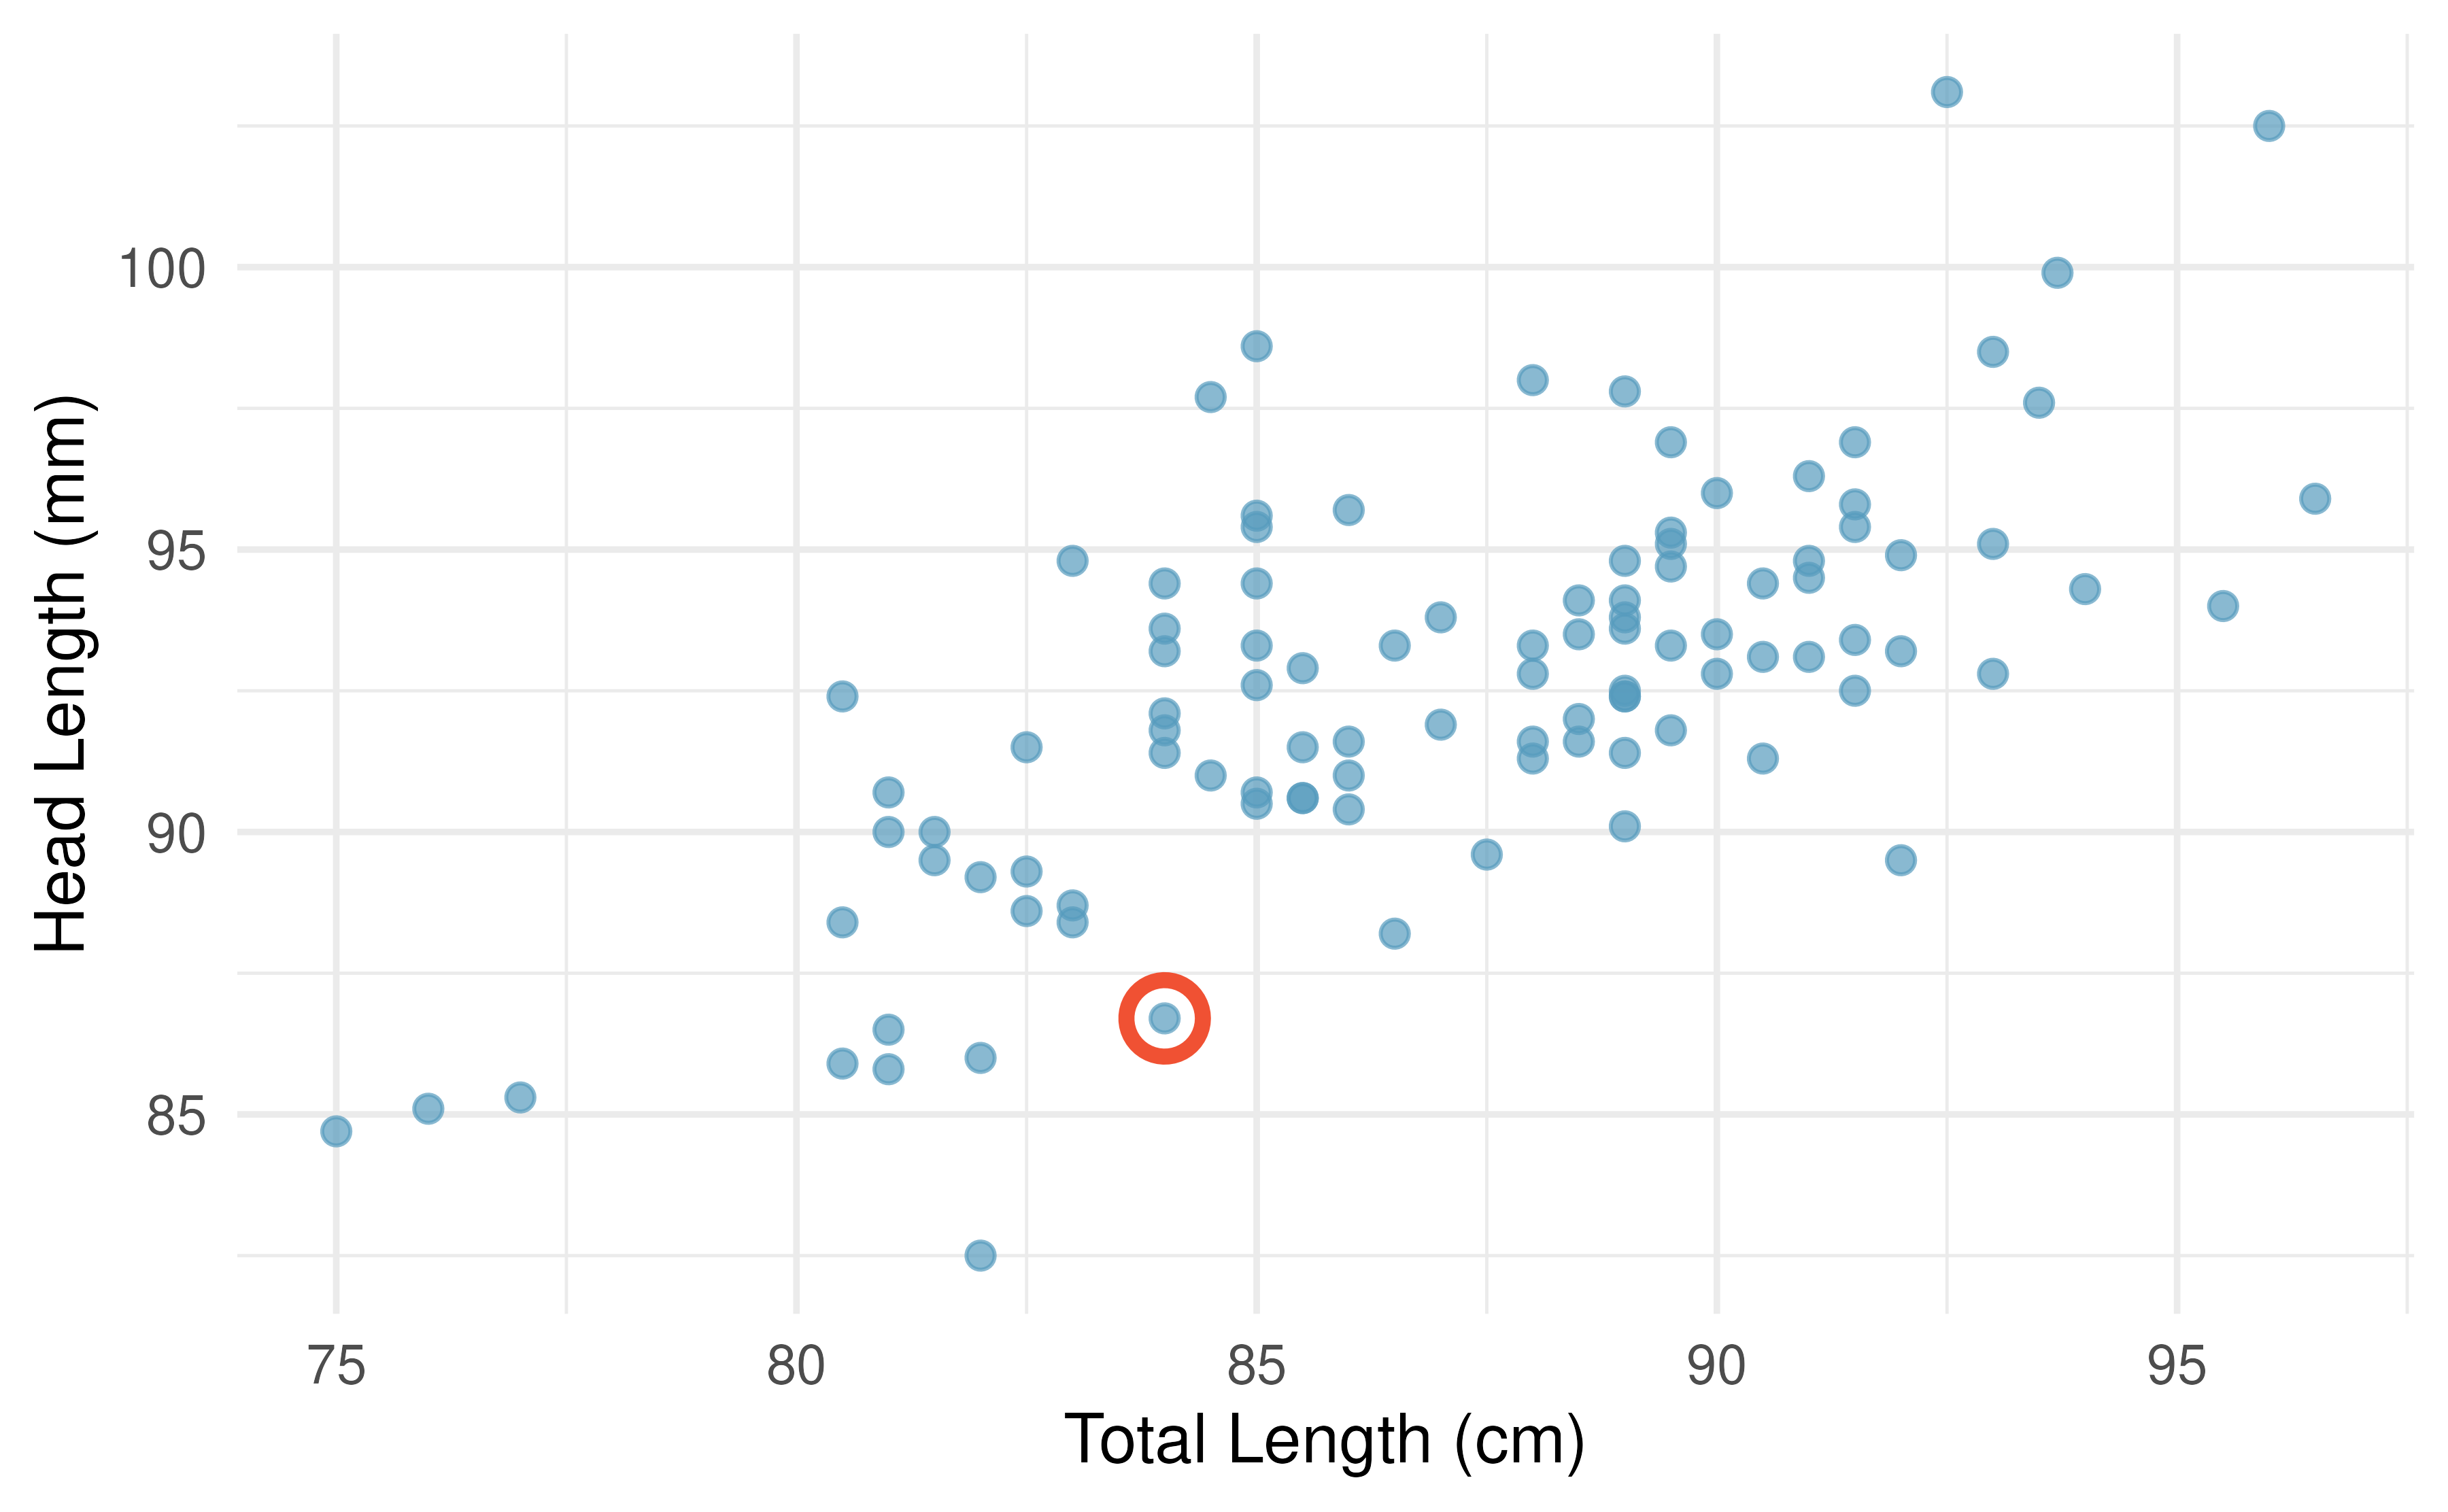 A scatterplot showing head length against total length for 104 brushtail possums. A point representing a possum with head length 86.7 mm and total length 84 cm is highlighted.